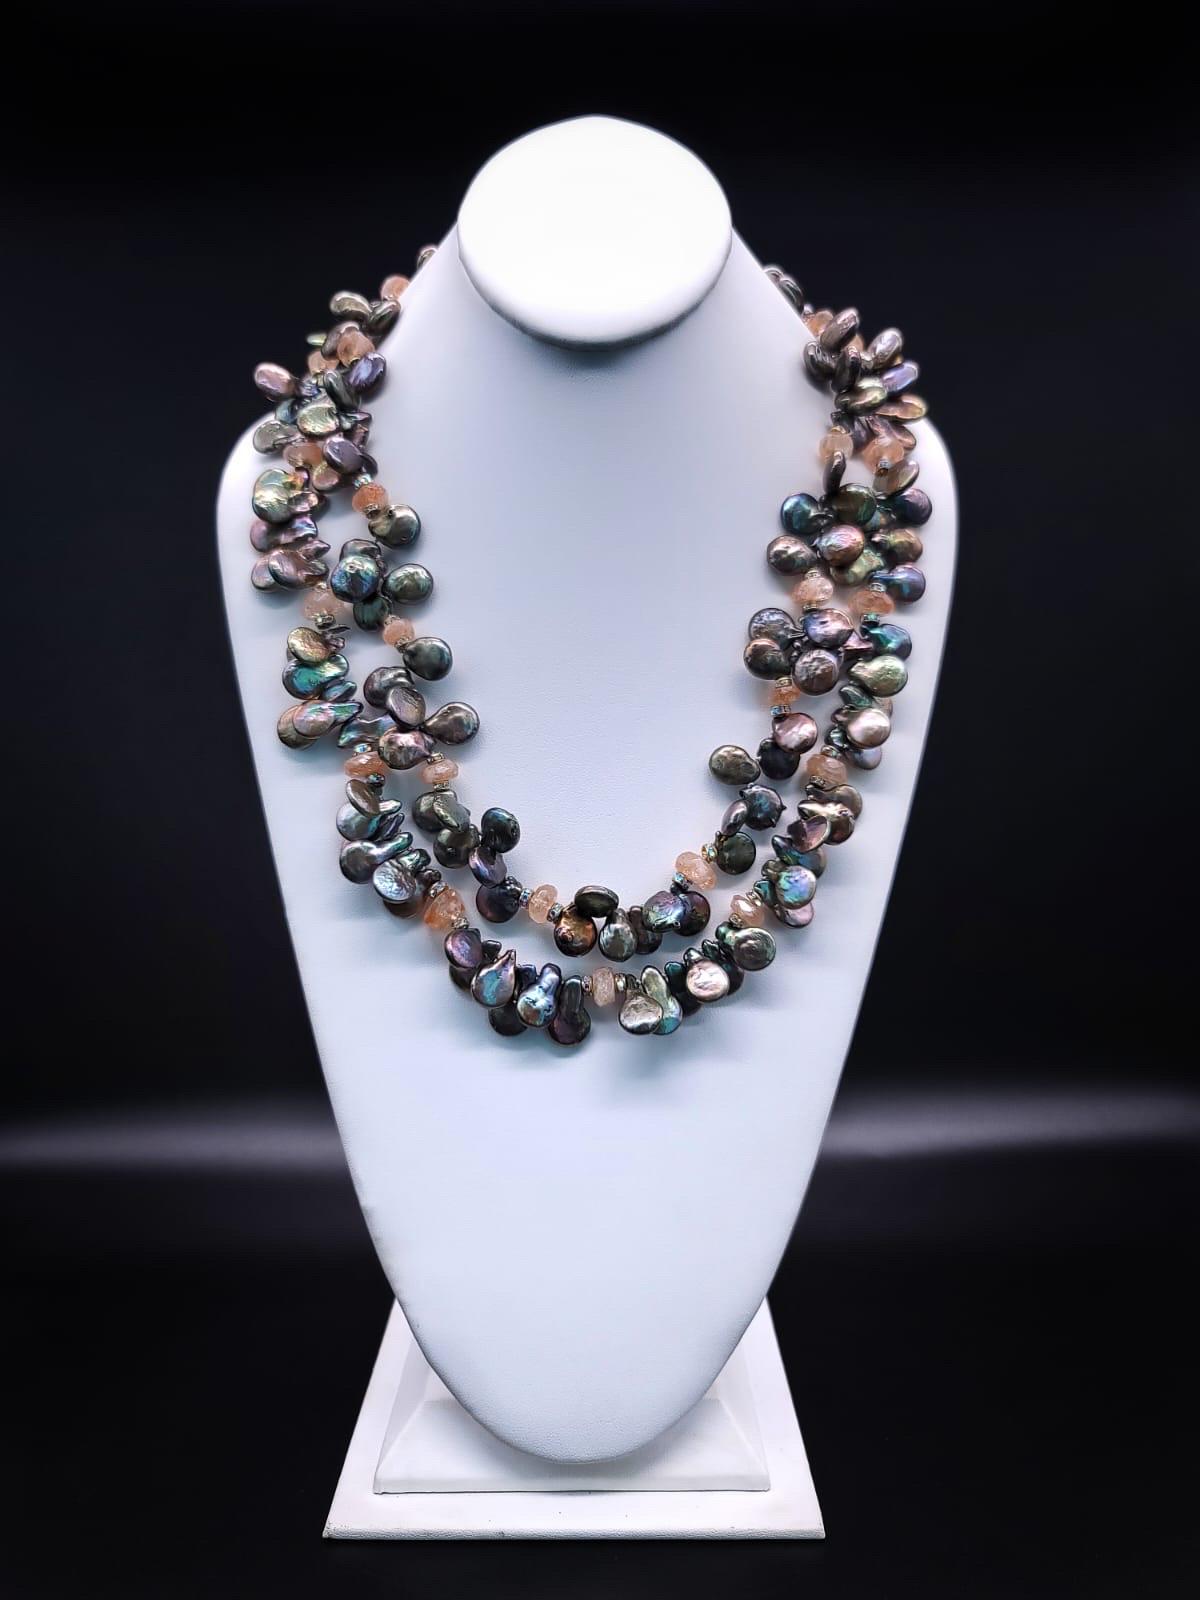 One-of-a-Kind

Indulge in timeless elegance with this exquisite two-strand lustrous top drilled necklace of gray pearl with an intriguing hand painted Russian miniature clasp. The pearl necklace is accented with faceted, softly colored, faceted